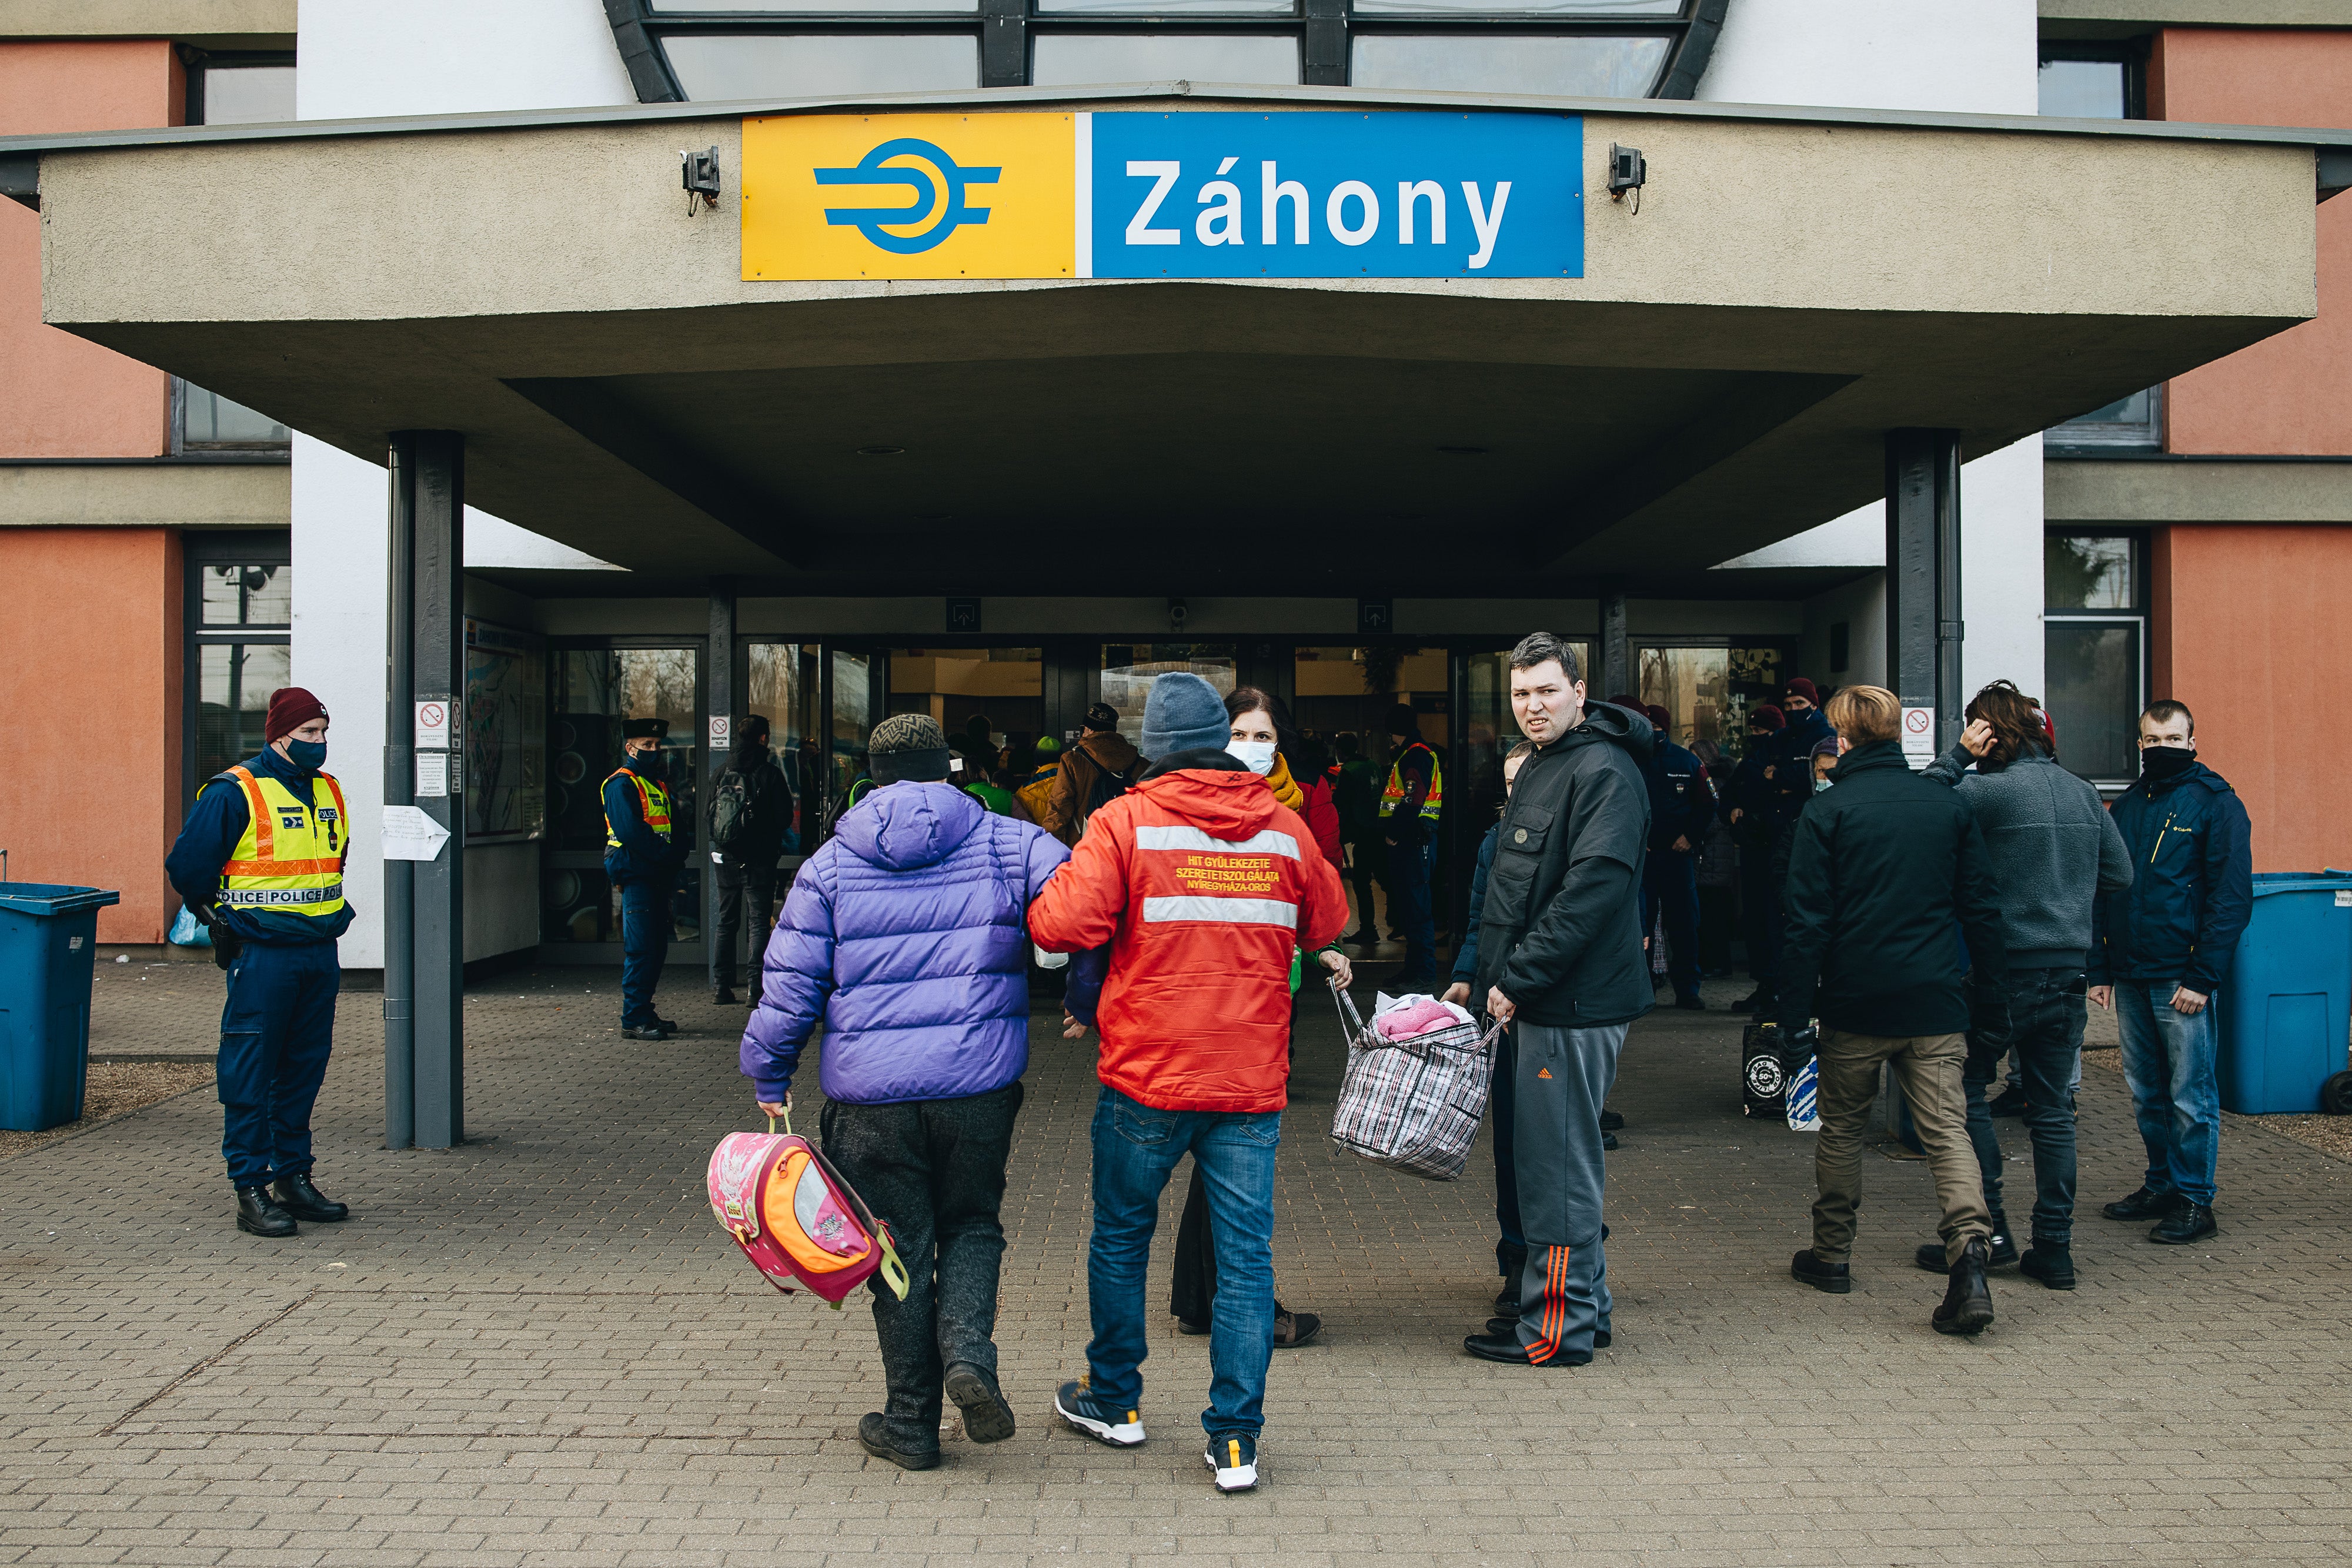 New arrivals from Ukraine at the railway station in Zahony